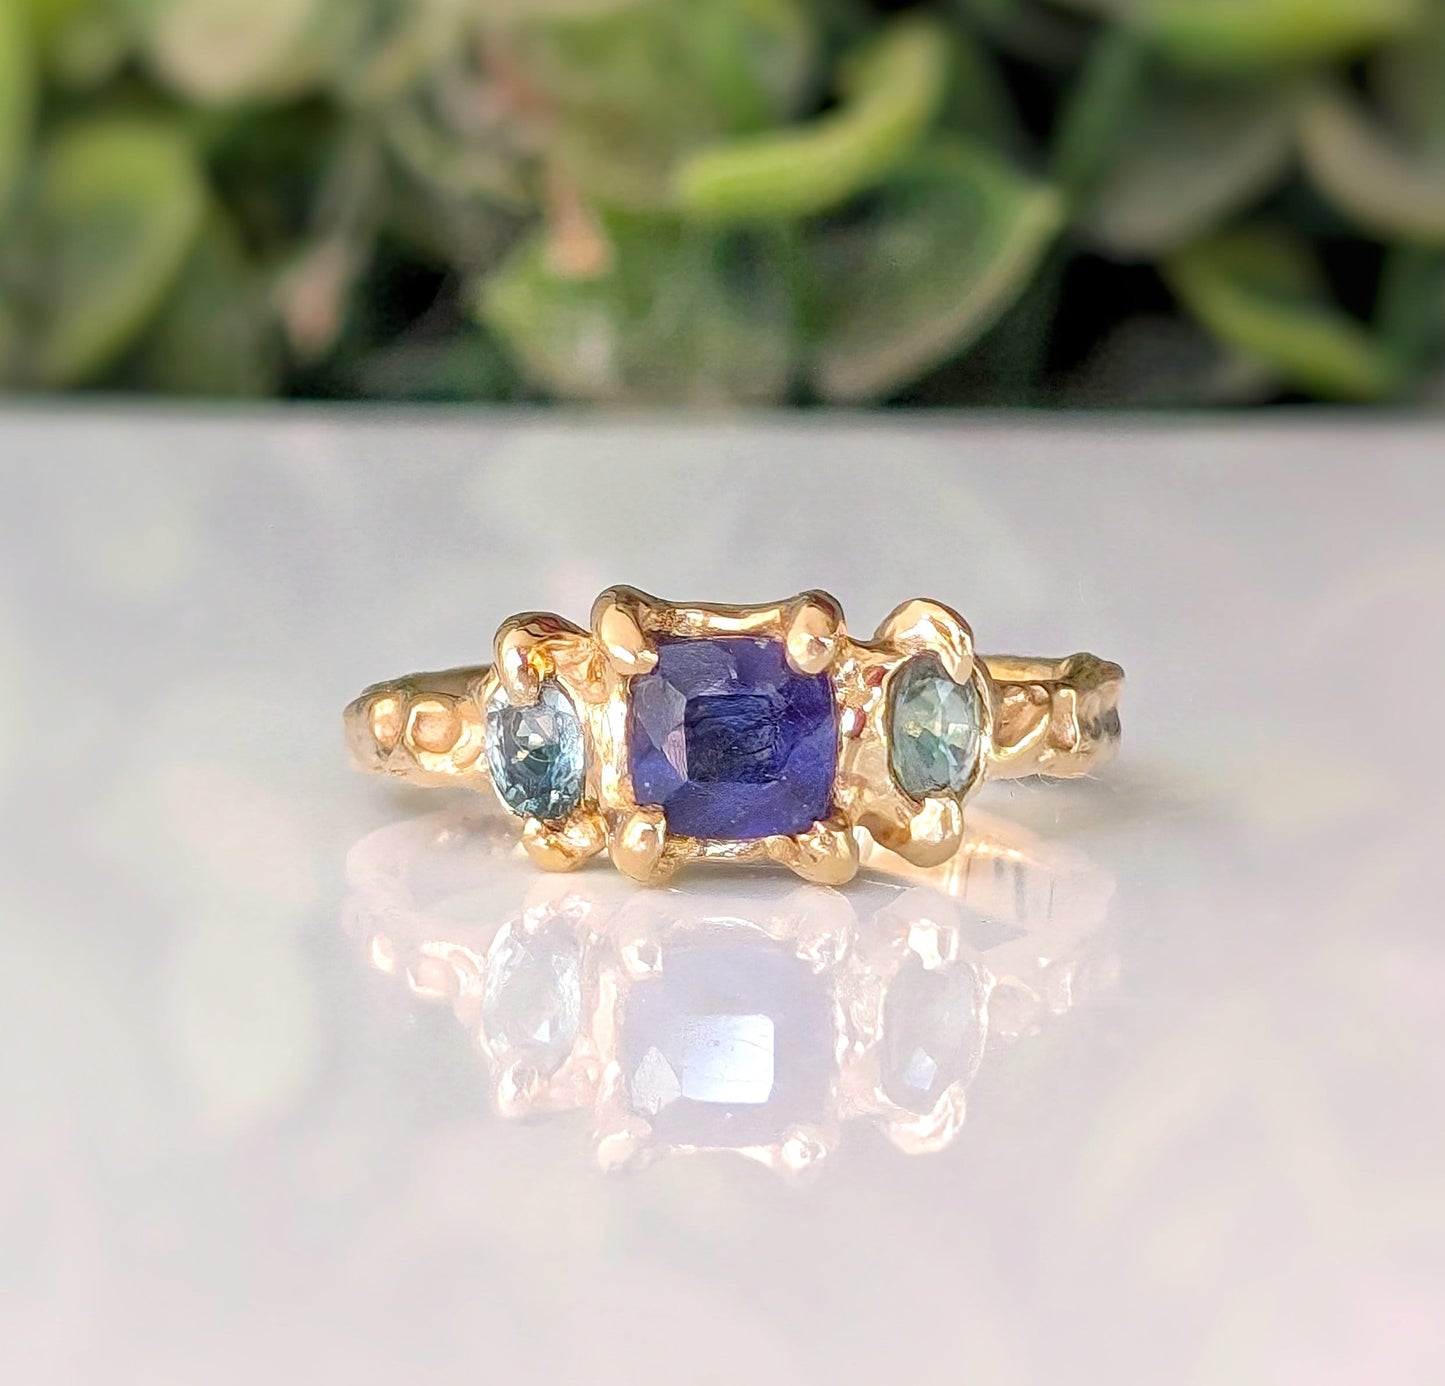 Square Blue Sapphire and 2 small green Tourmaline set by prongs on a textured Solid 14k Gold band